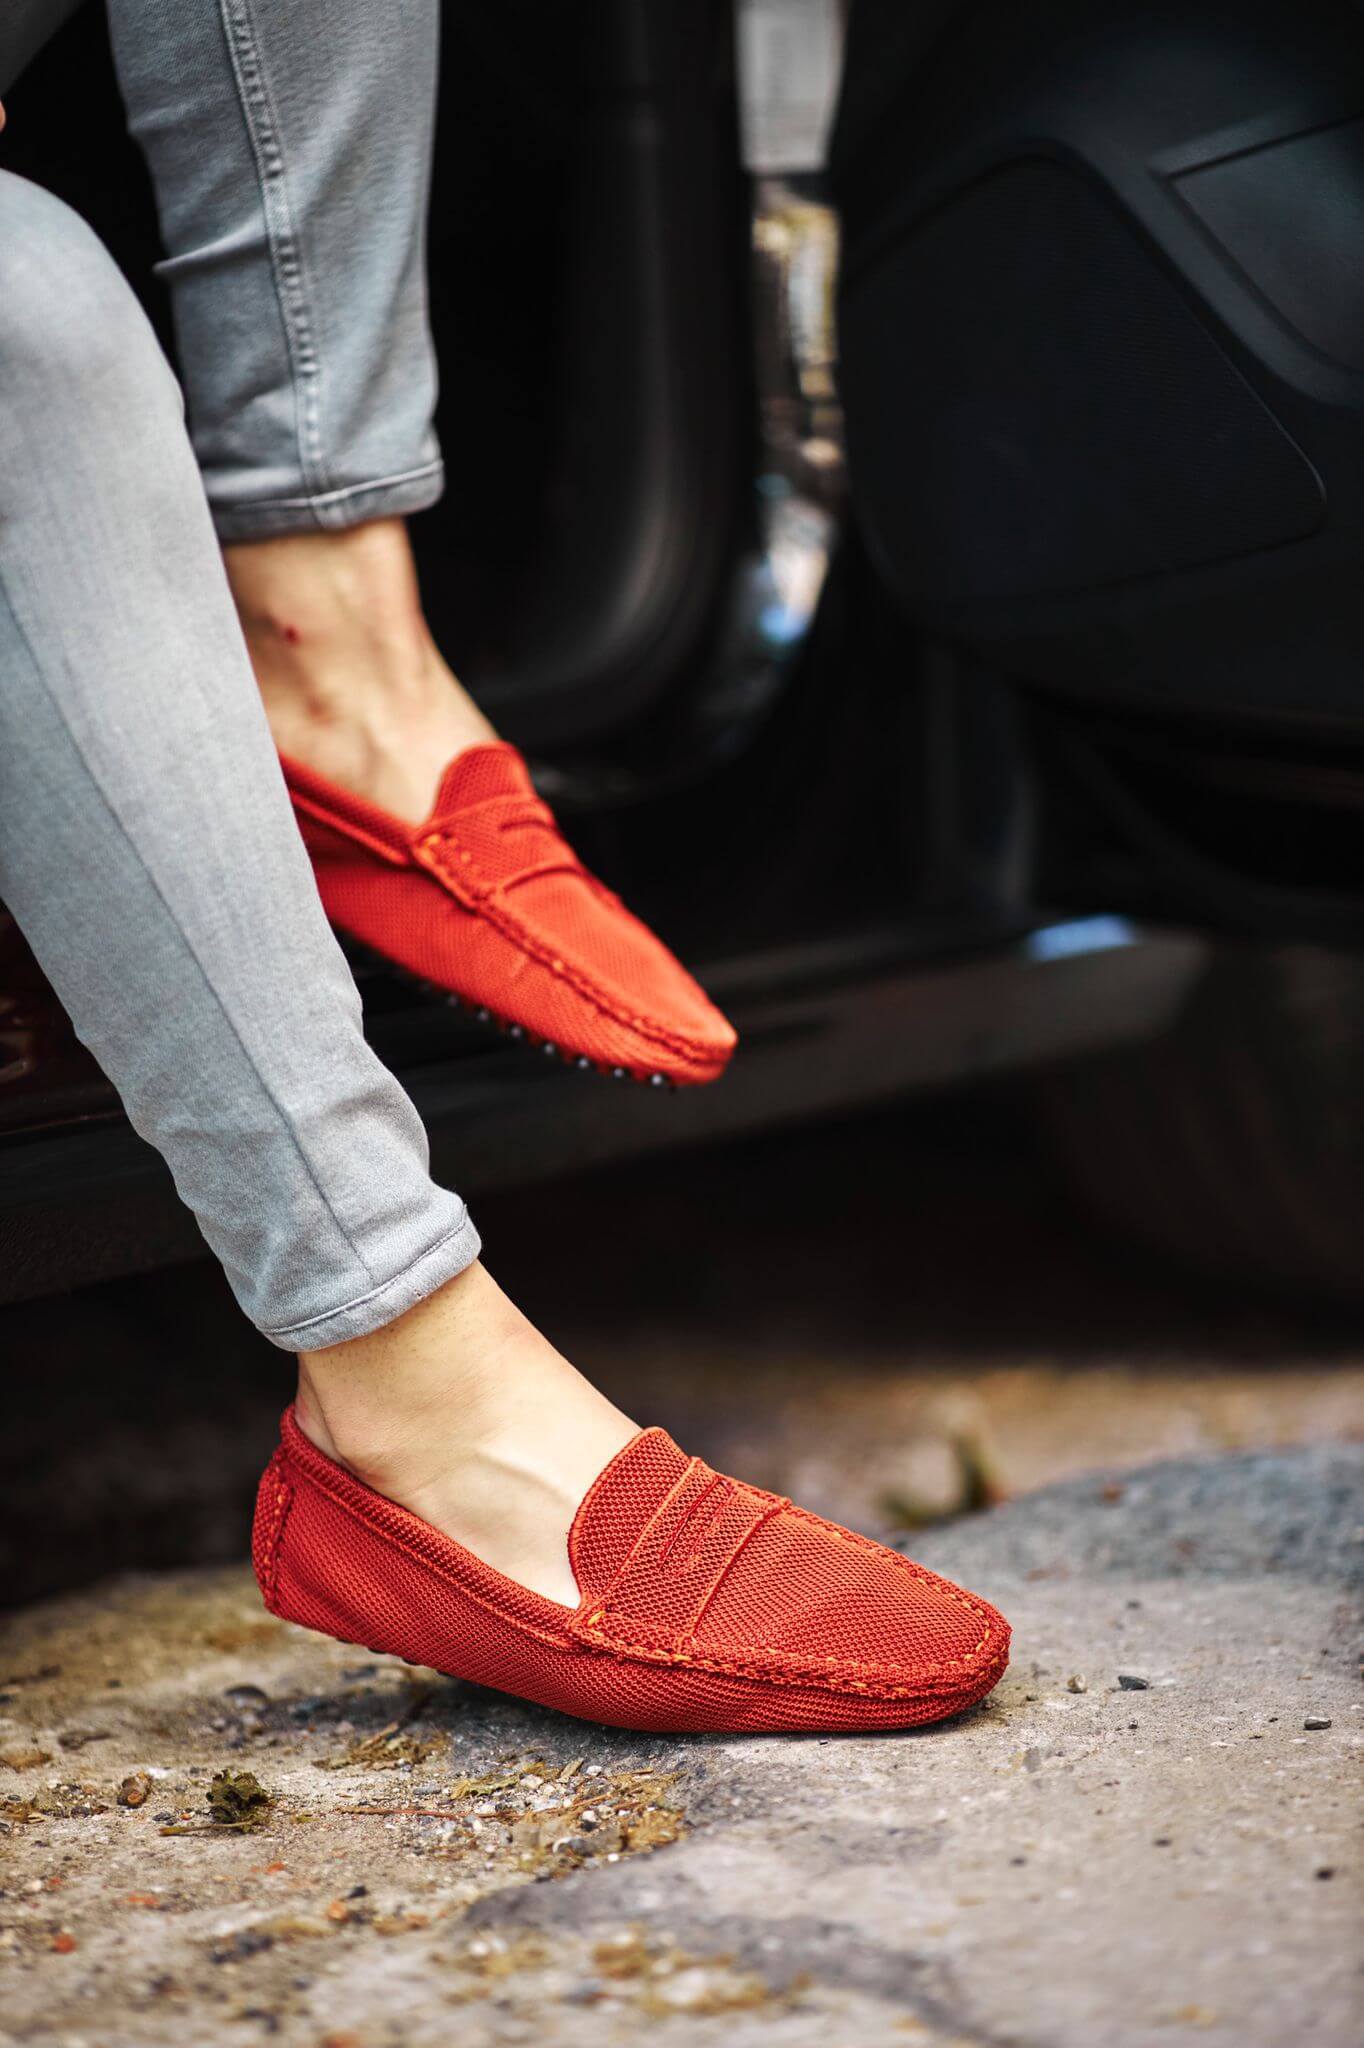 A Tile Knitwear Loafer on display.